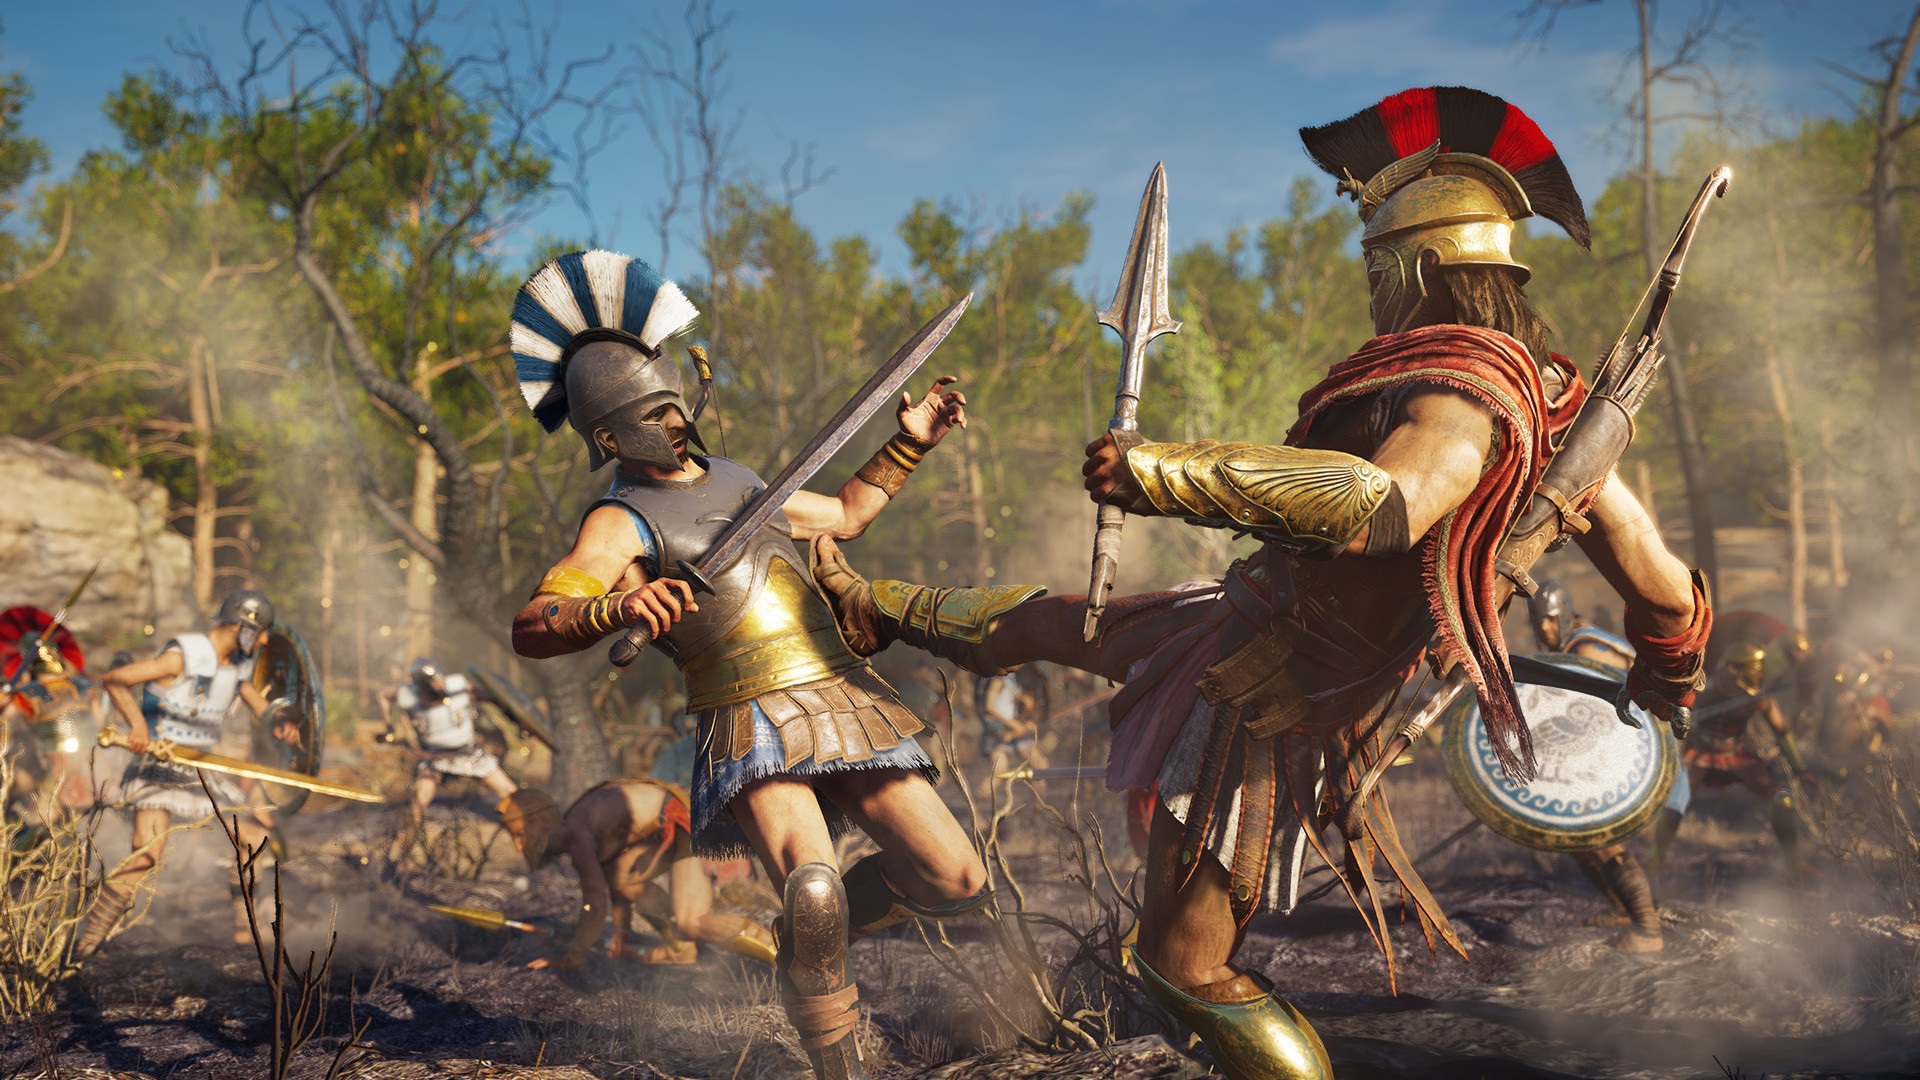 Assassin's Creed Odyssey Tips ⭐ Become The Best Warrior